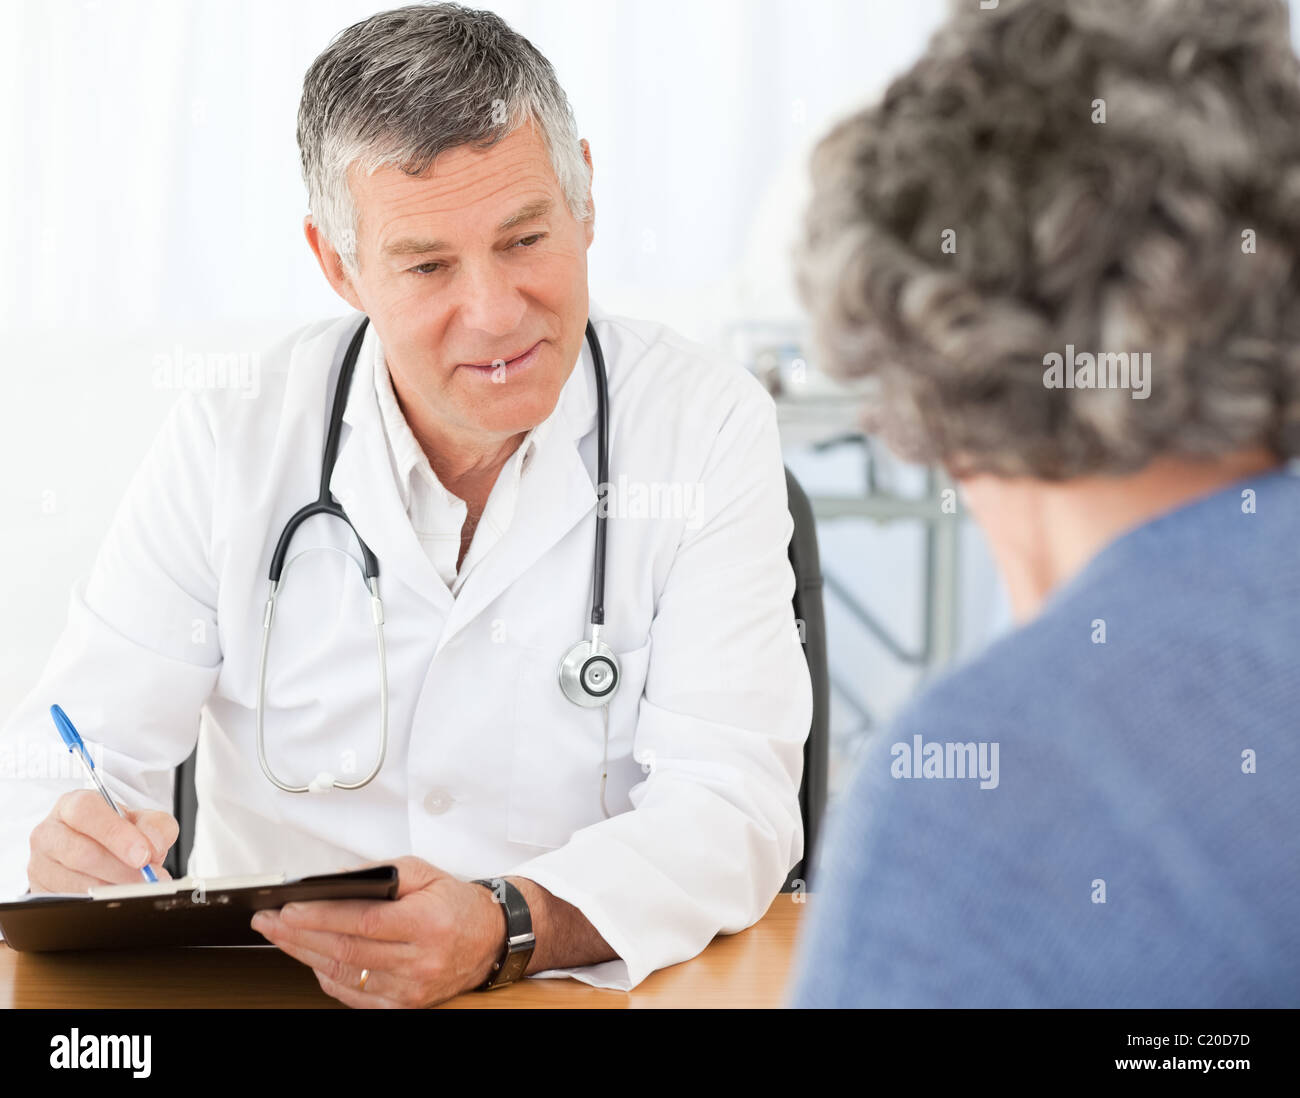 A Senior Doctor Talking With His Patient Stock Photo Alamy